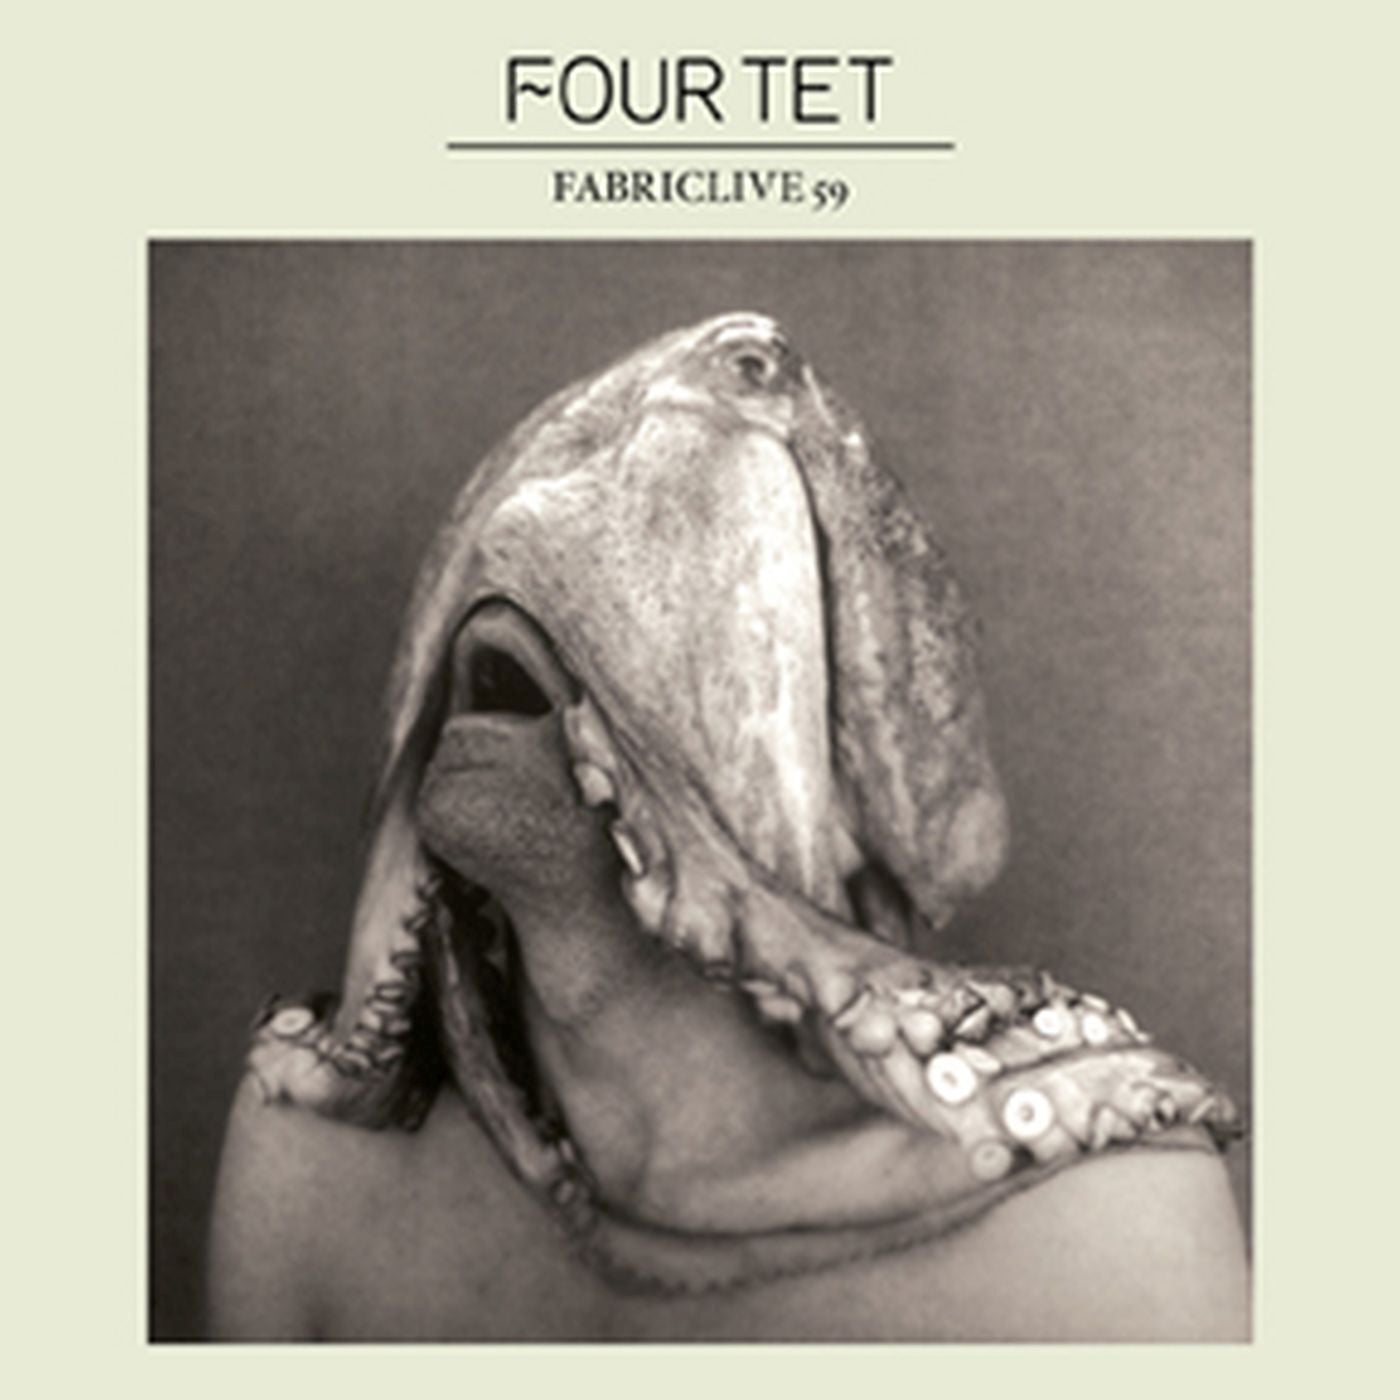 FABRICLIVE 59: Four Tet